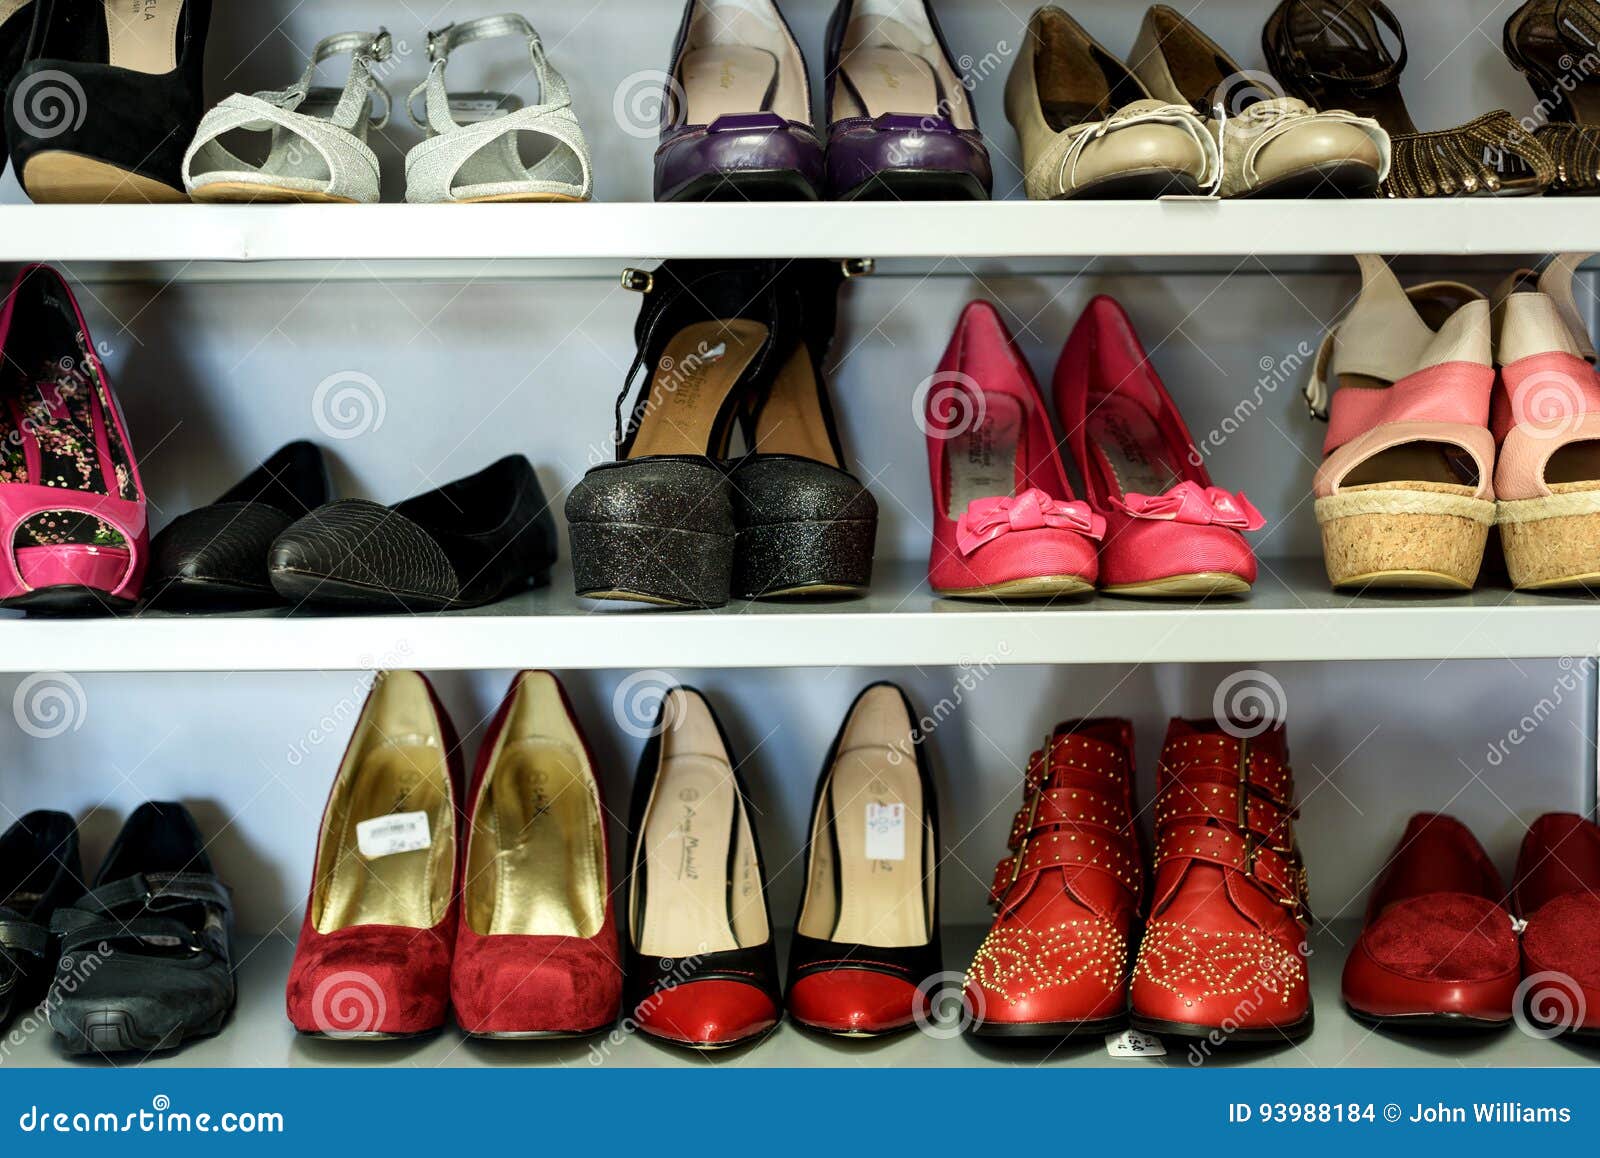 Rows of Womens Second Hand Shoes Editorial Stock Image - Image of ...